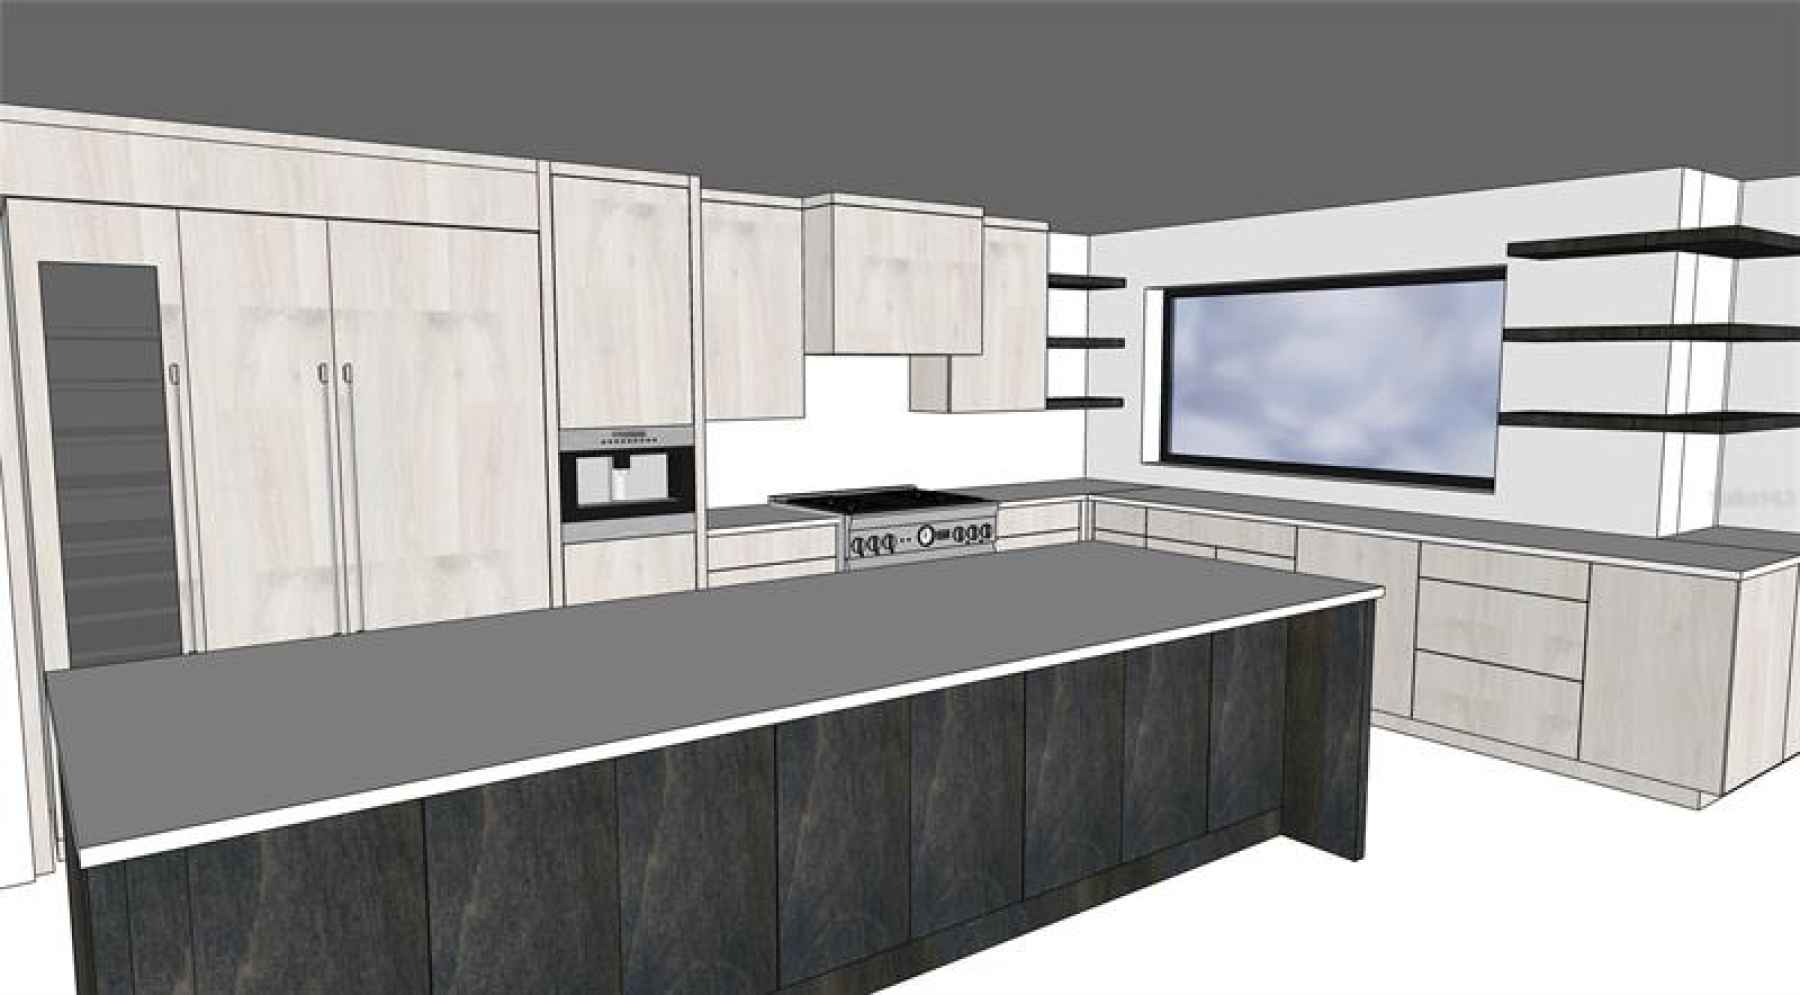 Sketch of layout for custom high end cabinetry kitchen with Thermador Appliance Package